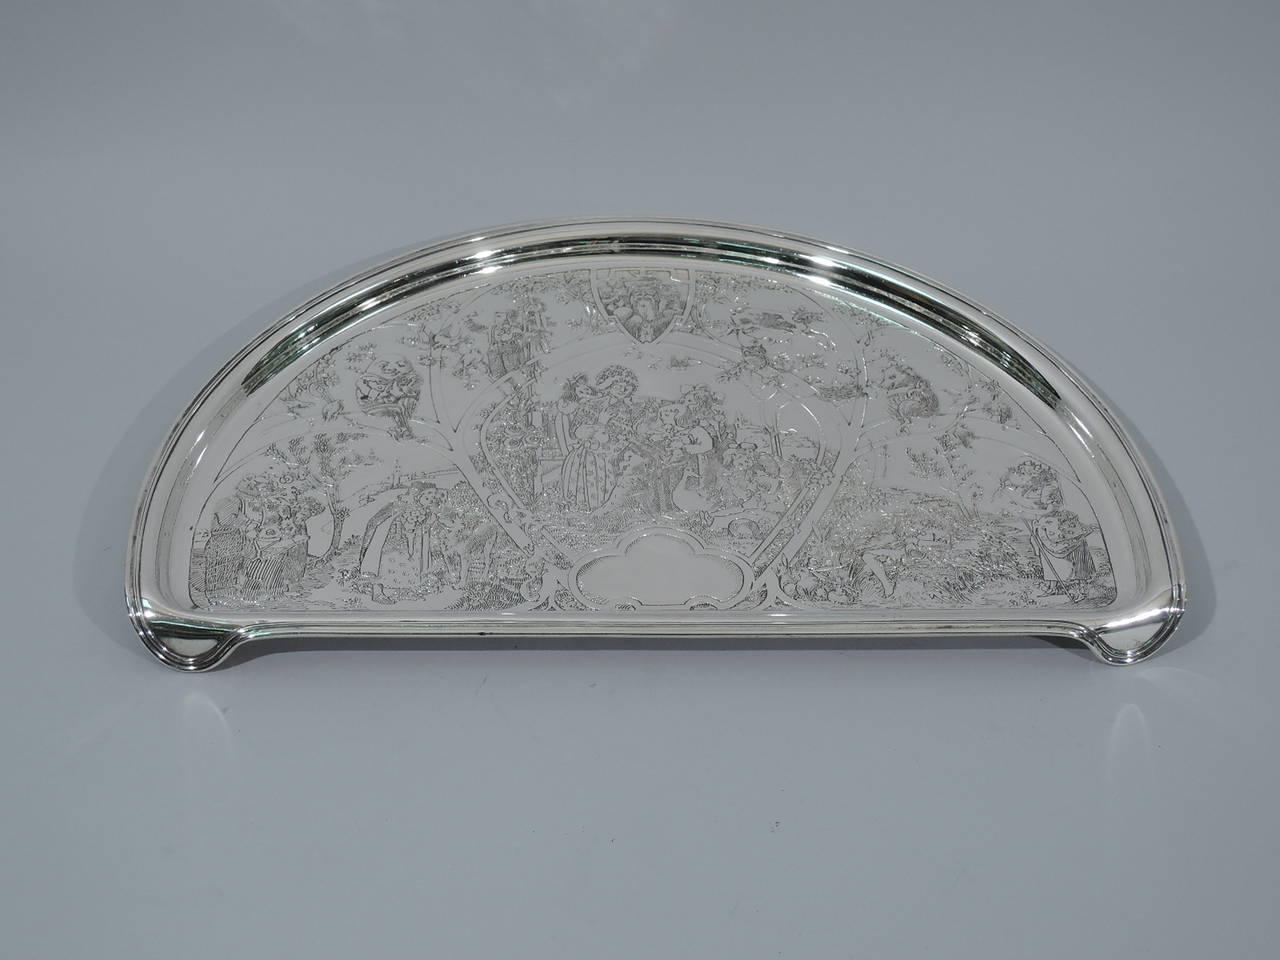 Sterling silver highchair tray. Made by William B. Kerr in Newark, ca. 1910. Lunette-form with acid-etched scenes from Mother Goose, including Red Riding Hood, Humpty Dumpty, and Little Bo Peep. In center frame sits the old dame herself surrounded